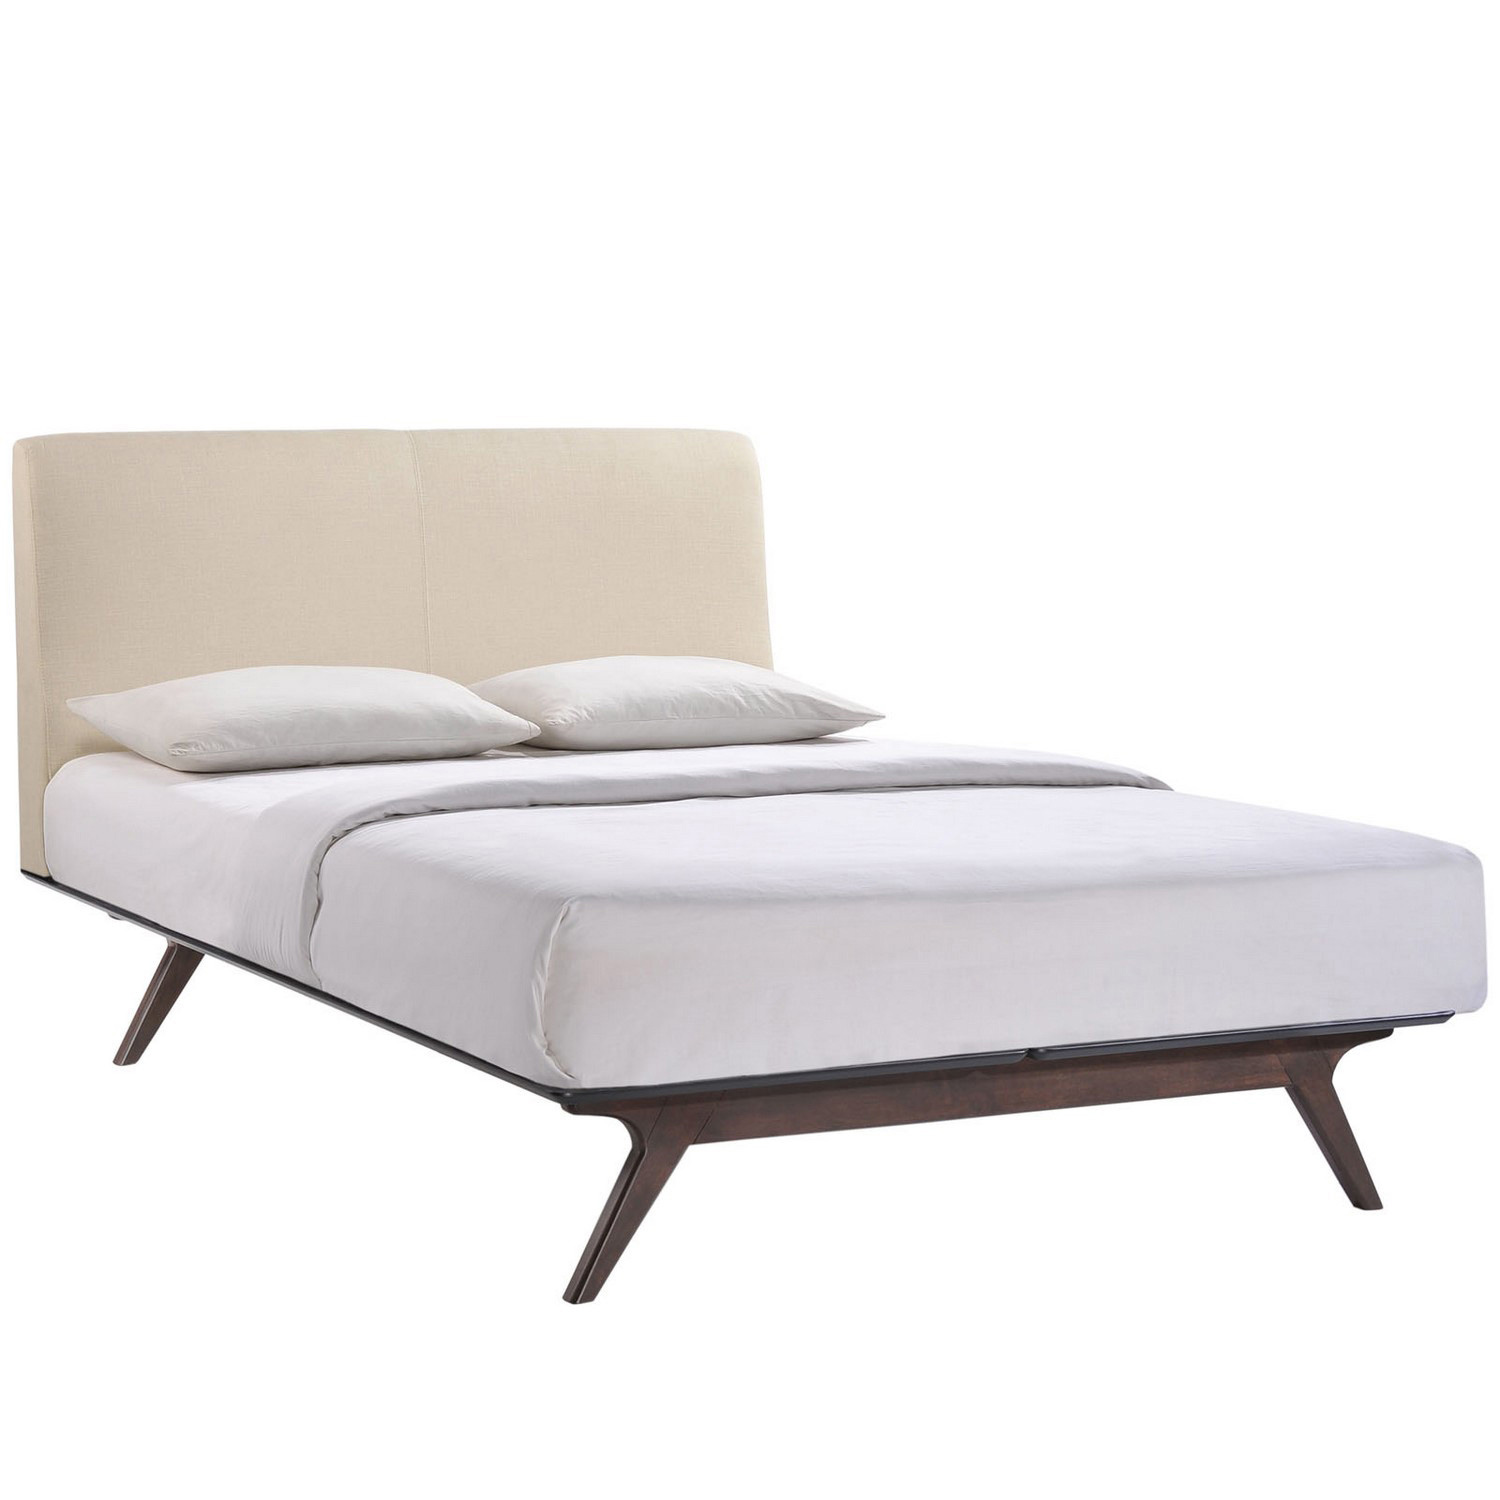 Modway Tracy Queen Bed - Cappuccino Beige